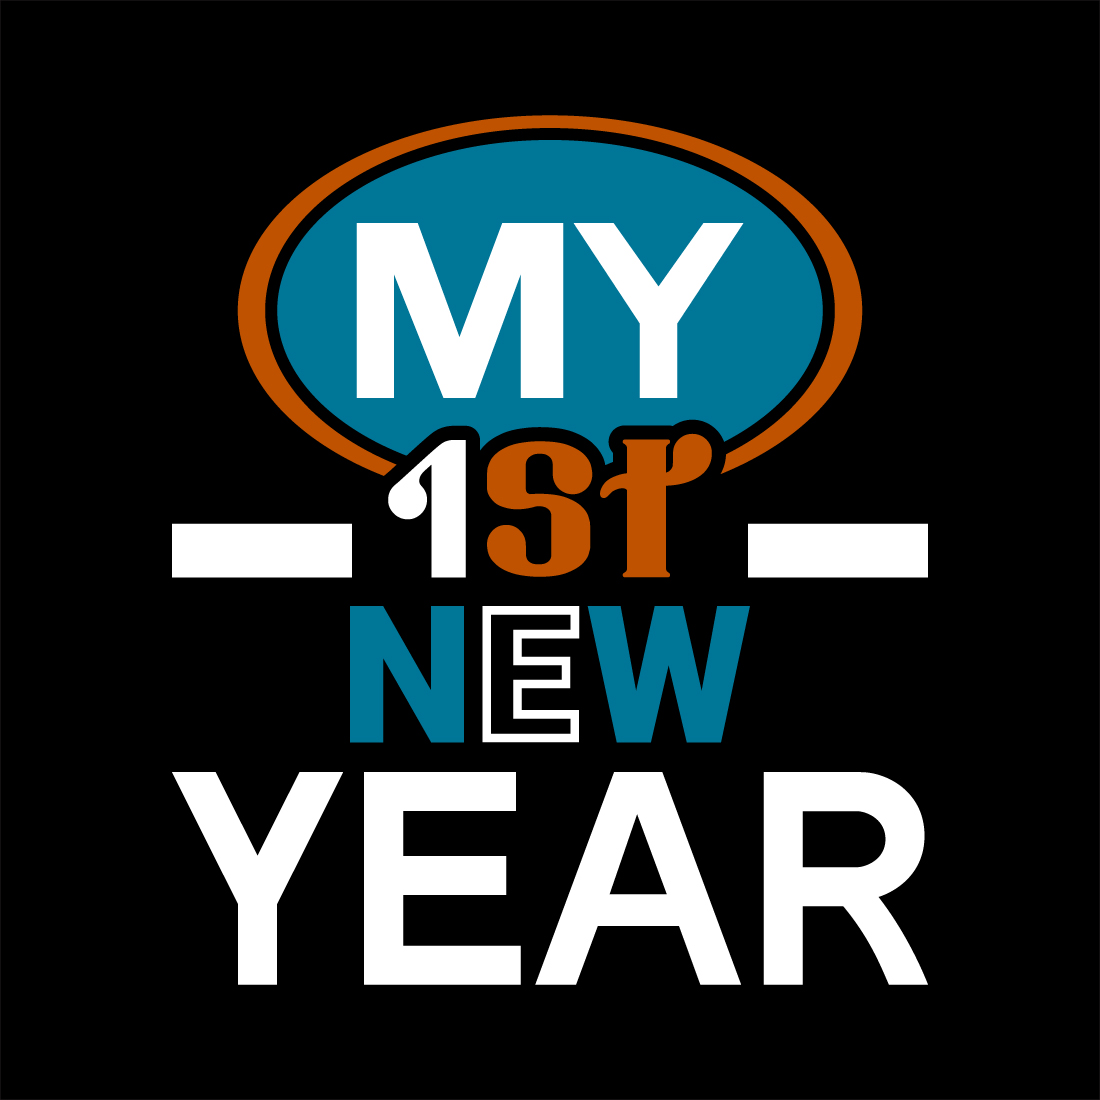 Irresistible image with the words "My 1st New Year".